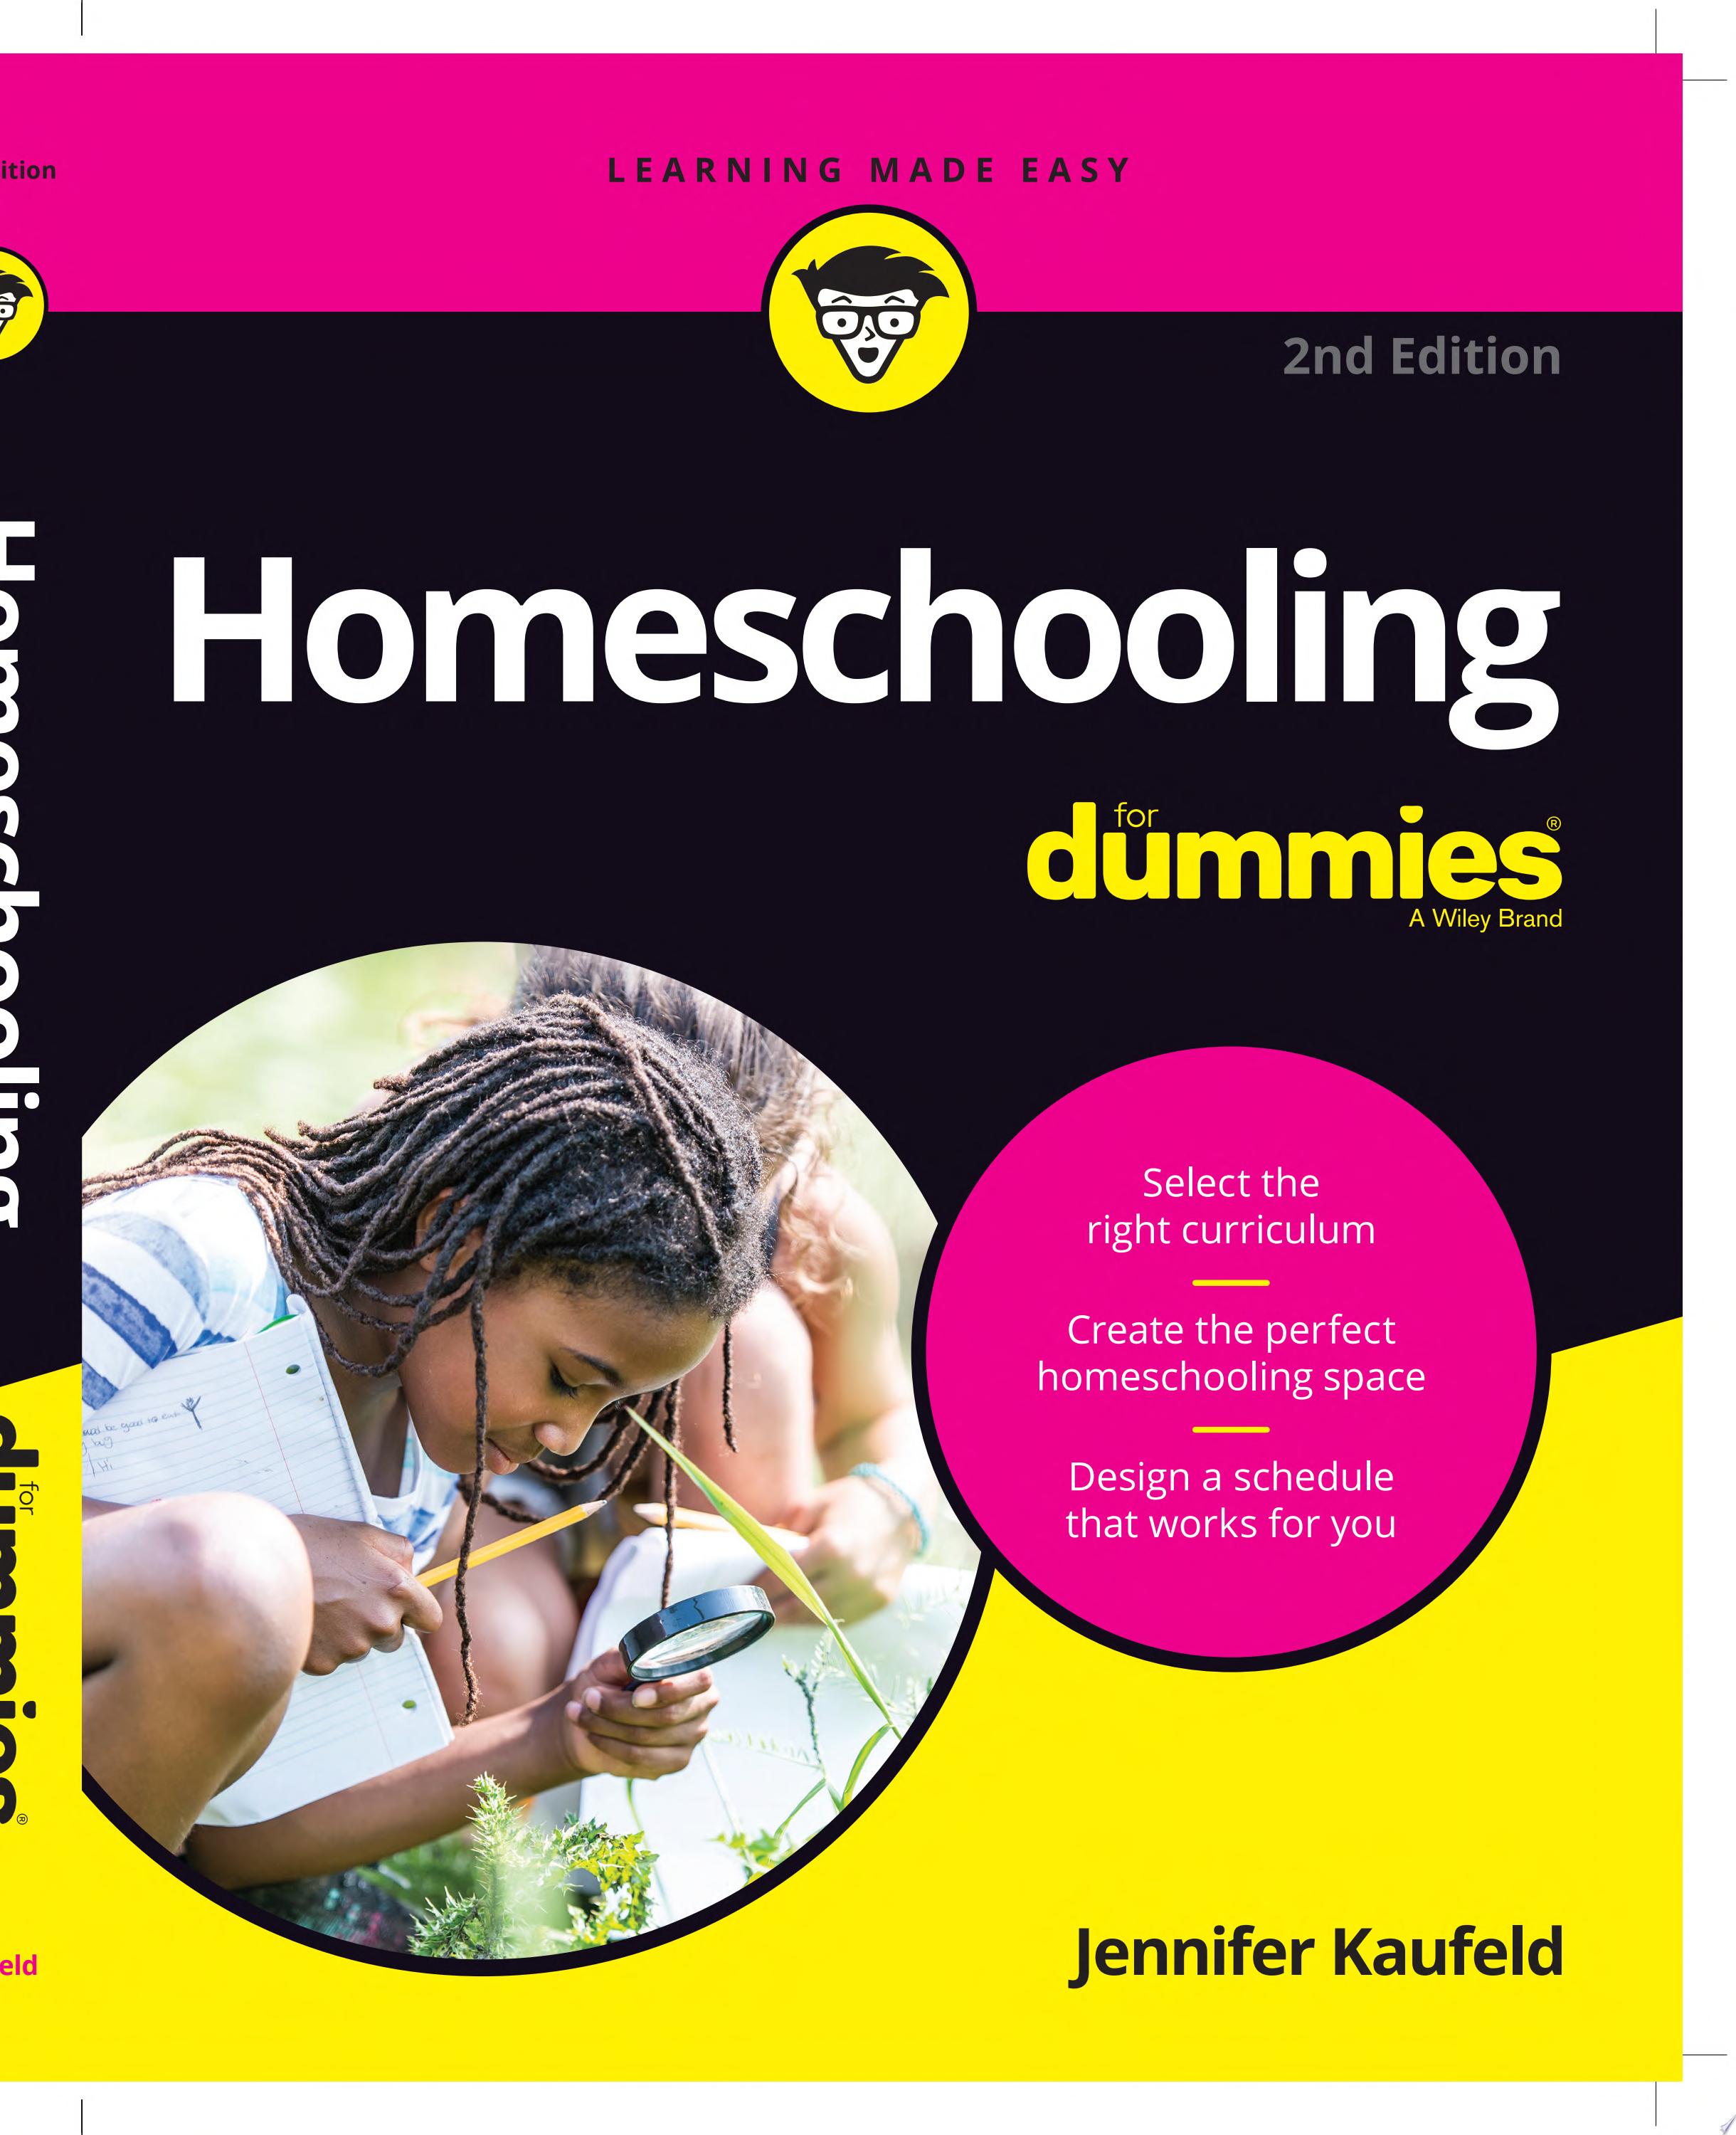 Image for "Homeschooling For Dummies"